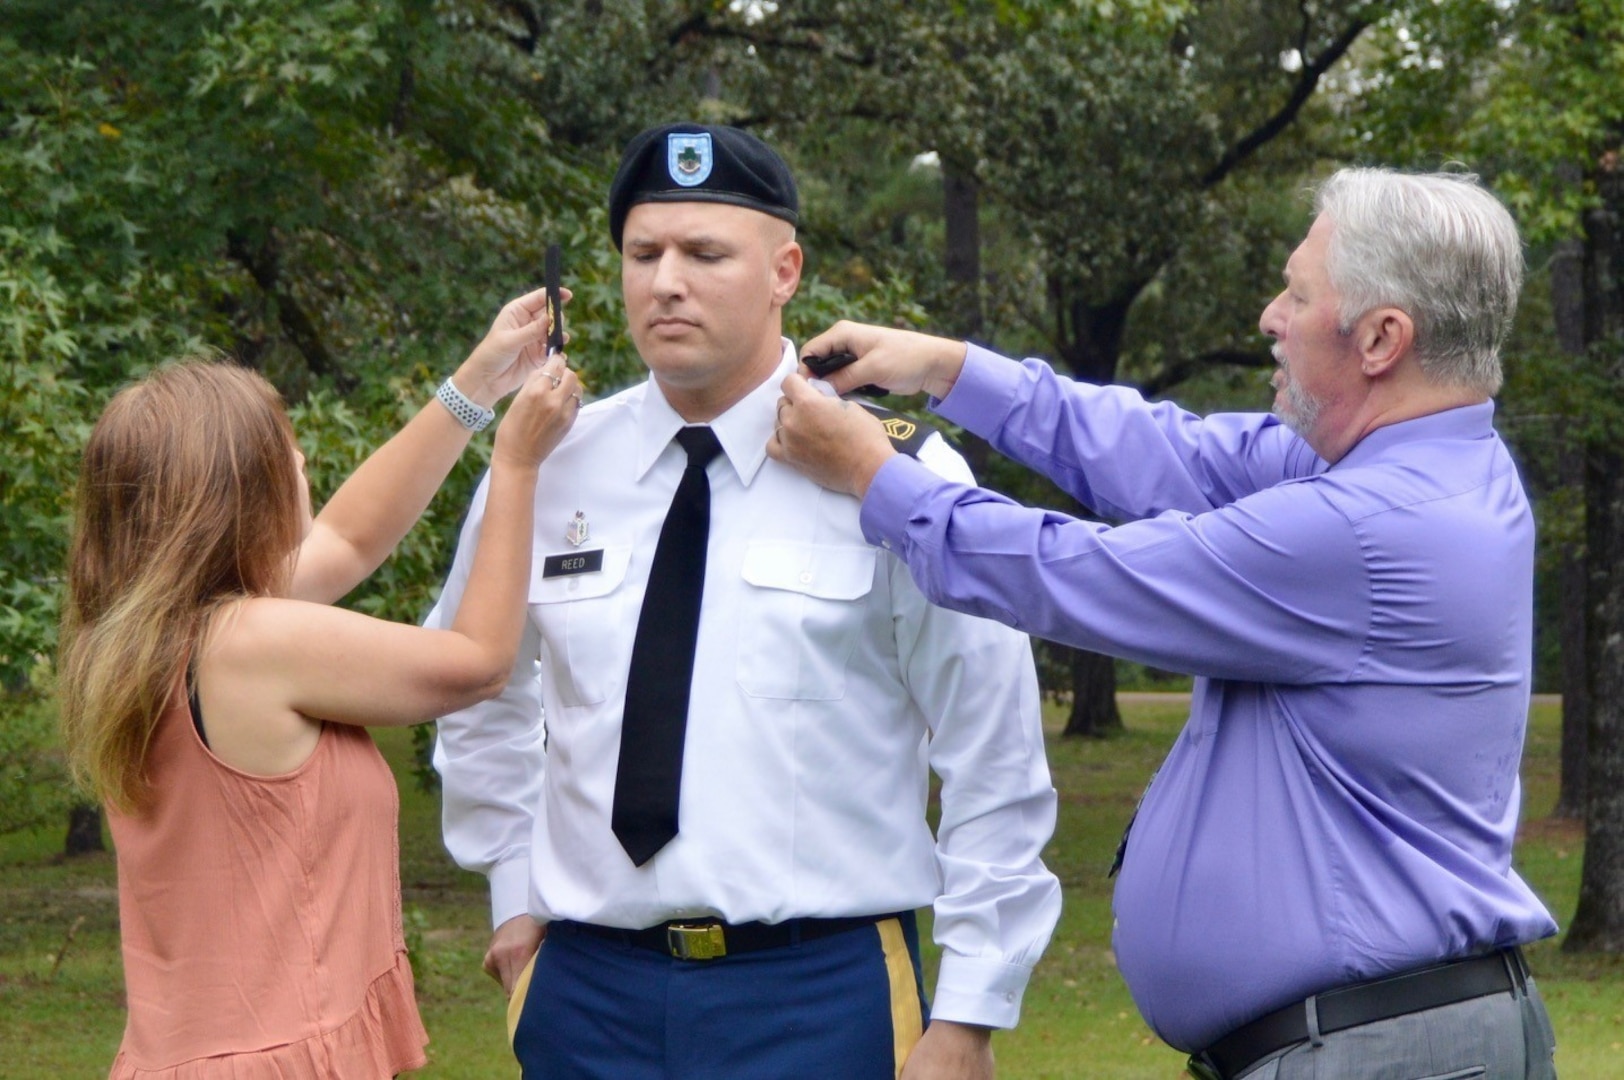 Sgt. 1st Class Johnathan Reed was promoted by his father (right), retired Sgt. 1st Class Jack Reed and his wife (left) Christy Reed.